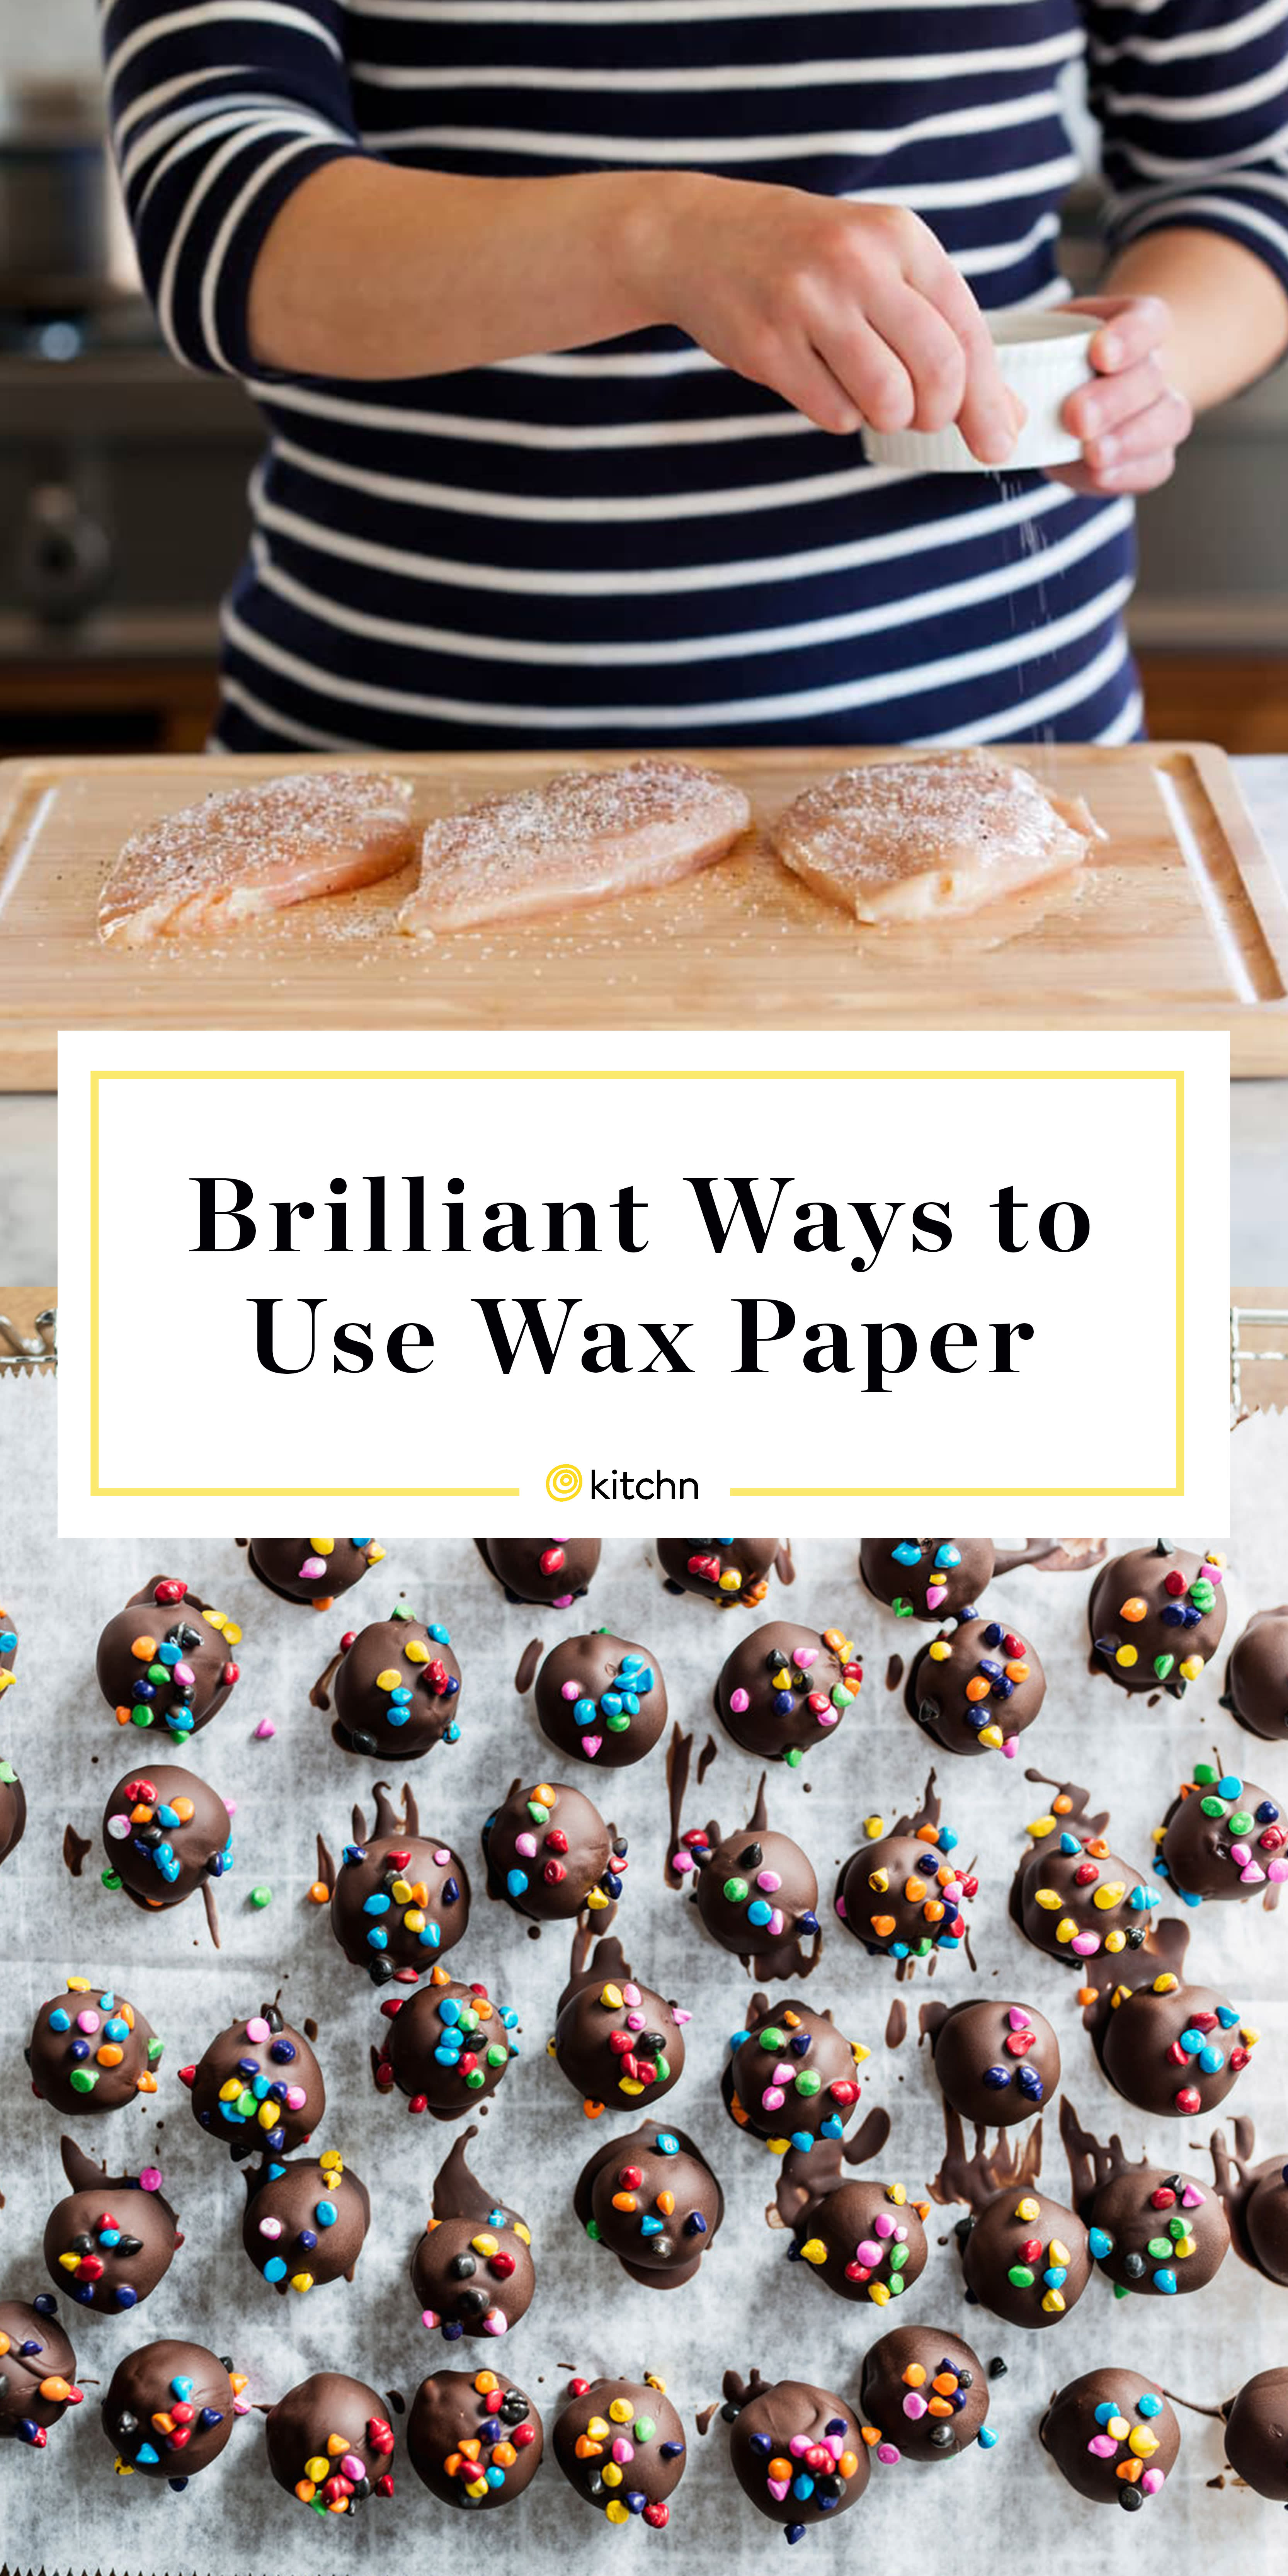 10 Clever Ways to Use Wax Paper